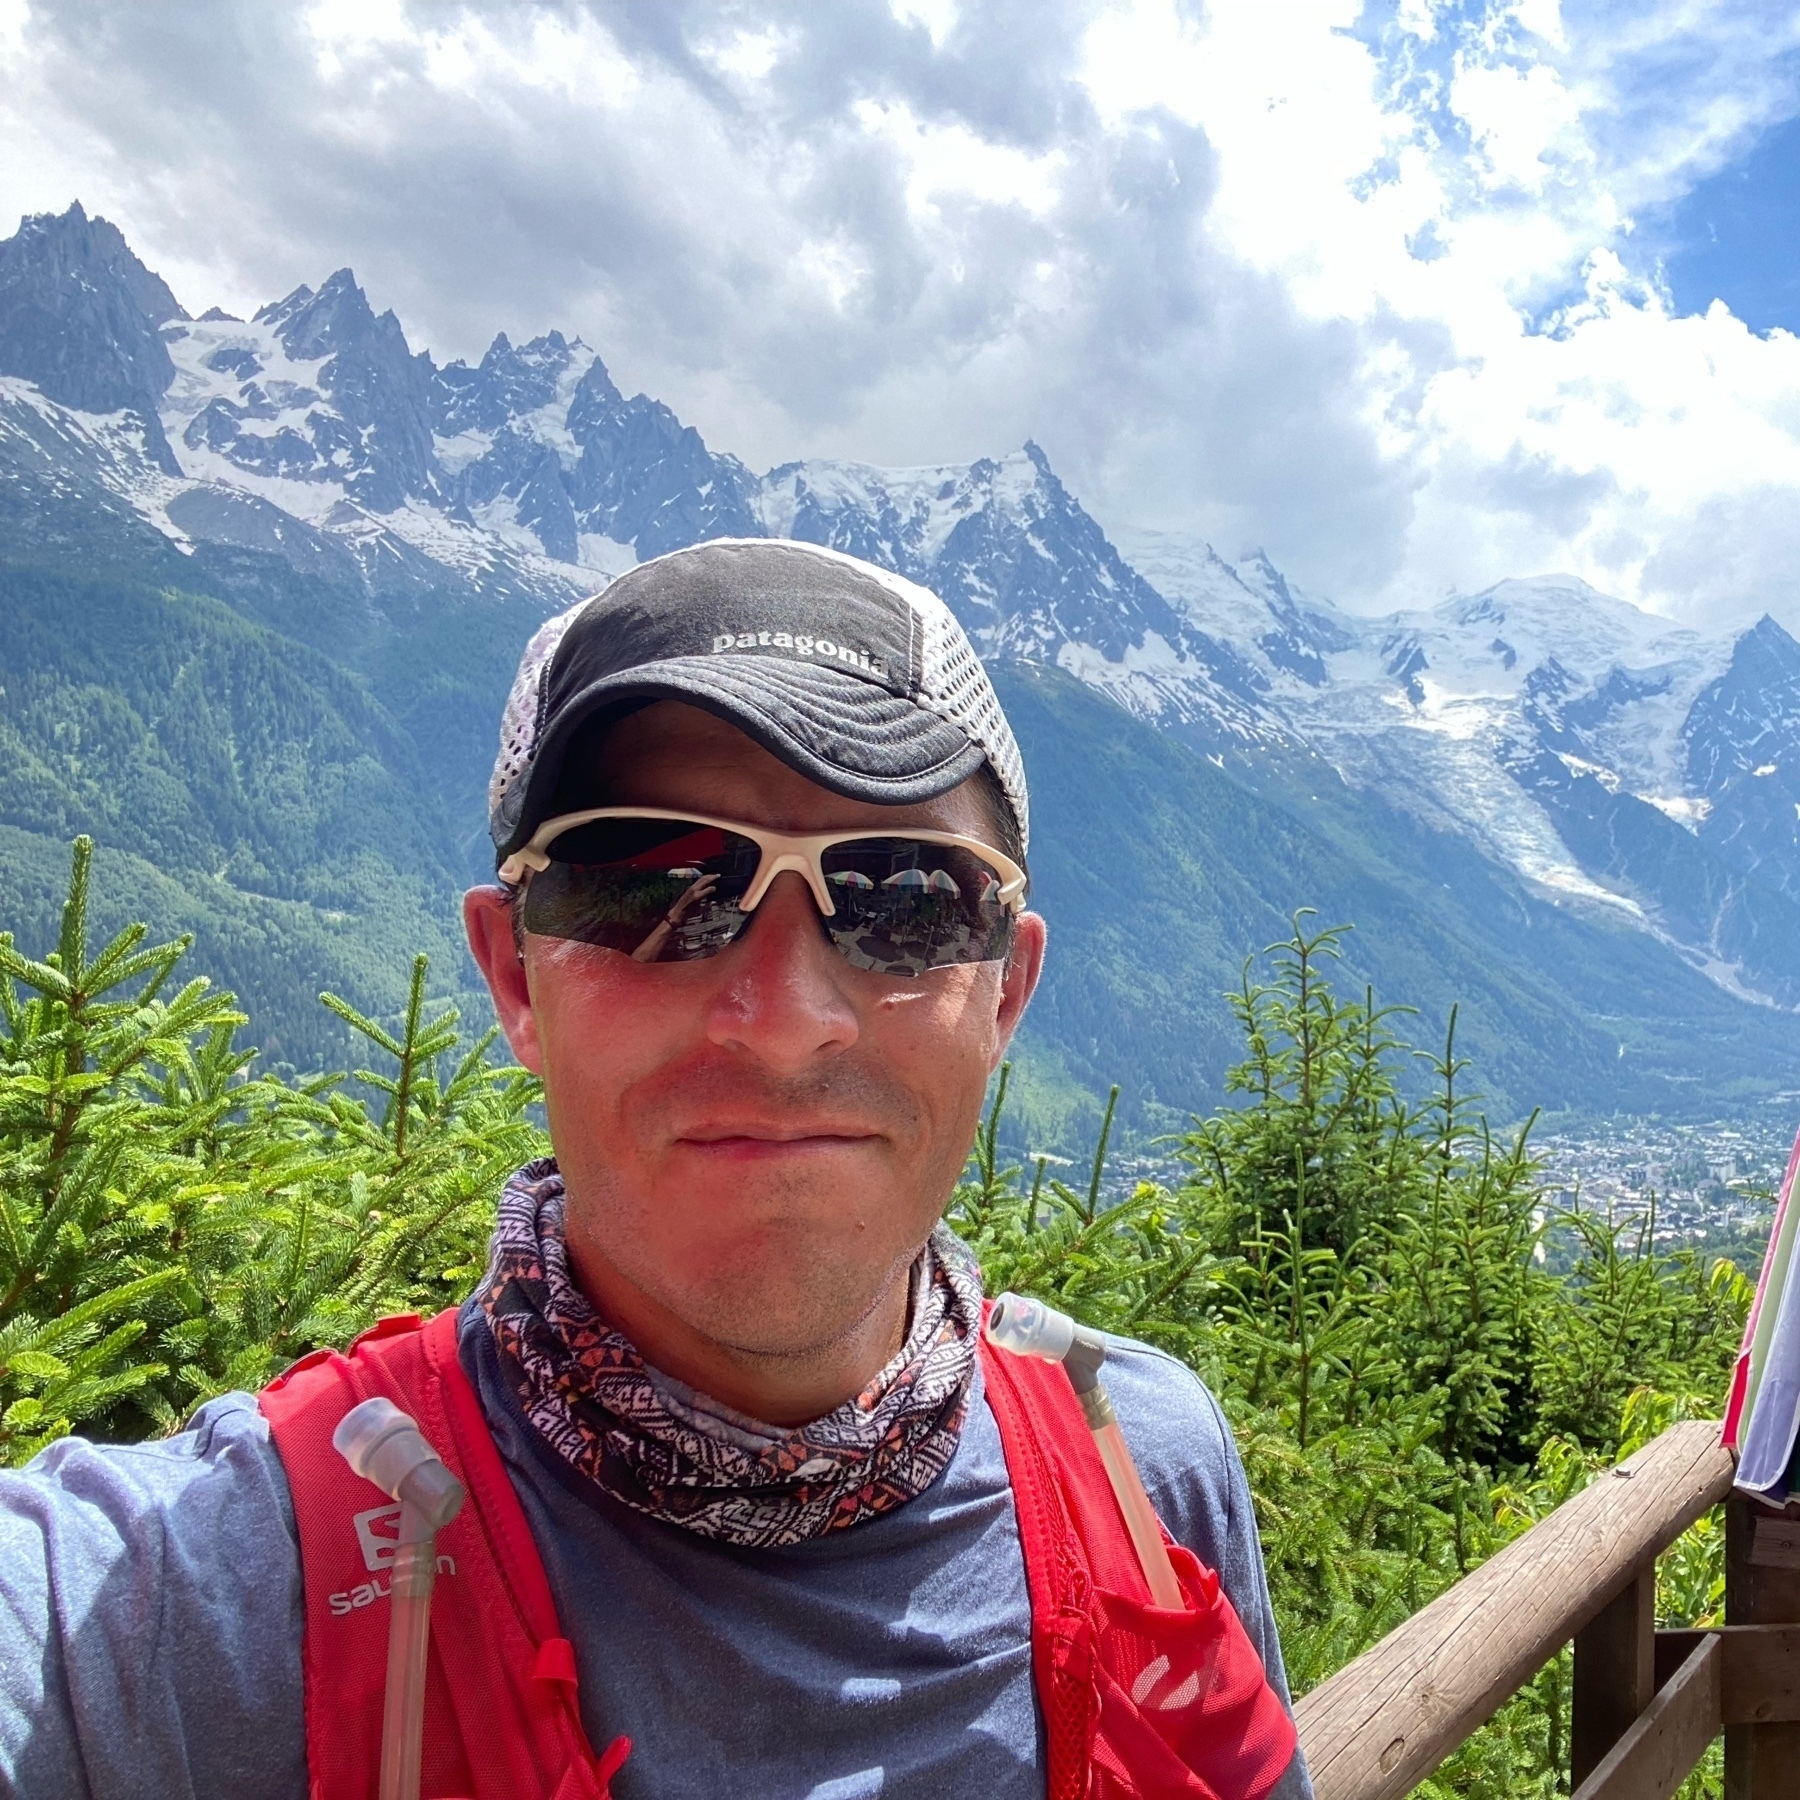 aaron selfie at chalet floria in the French alps near chamonix.  